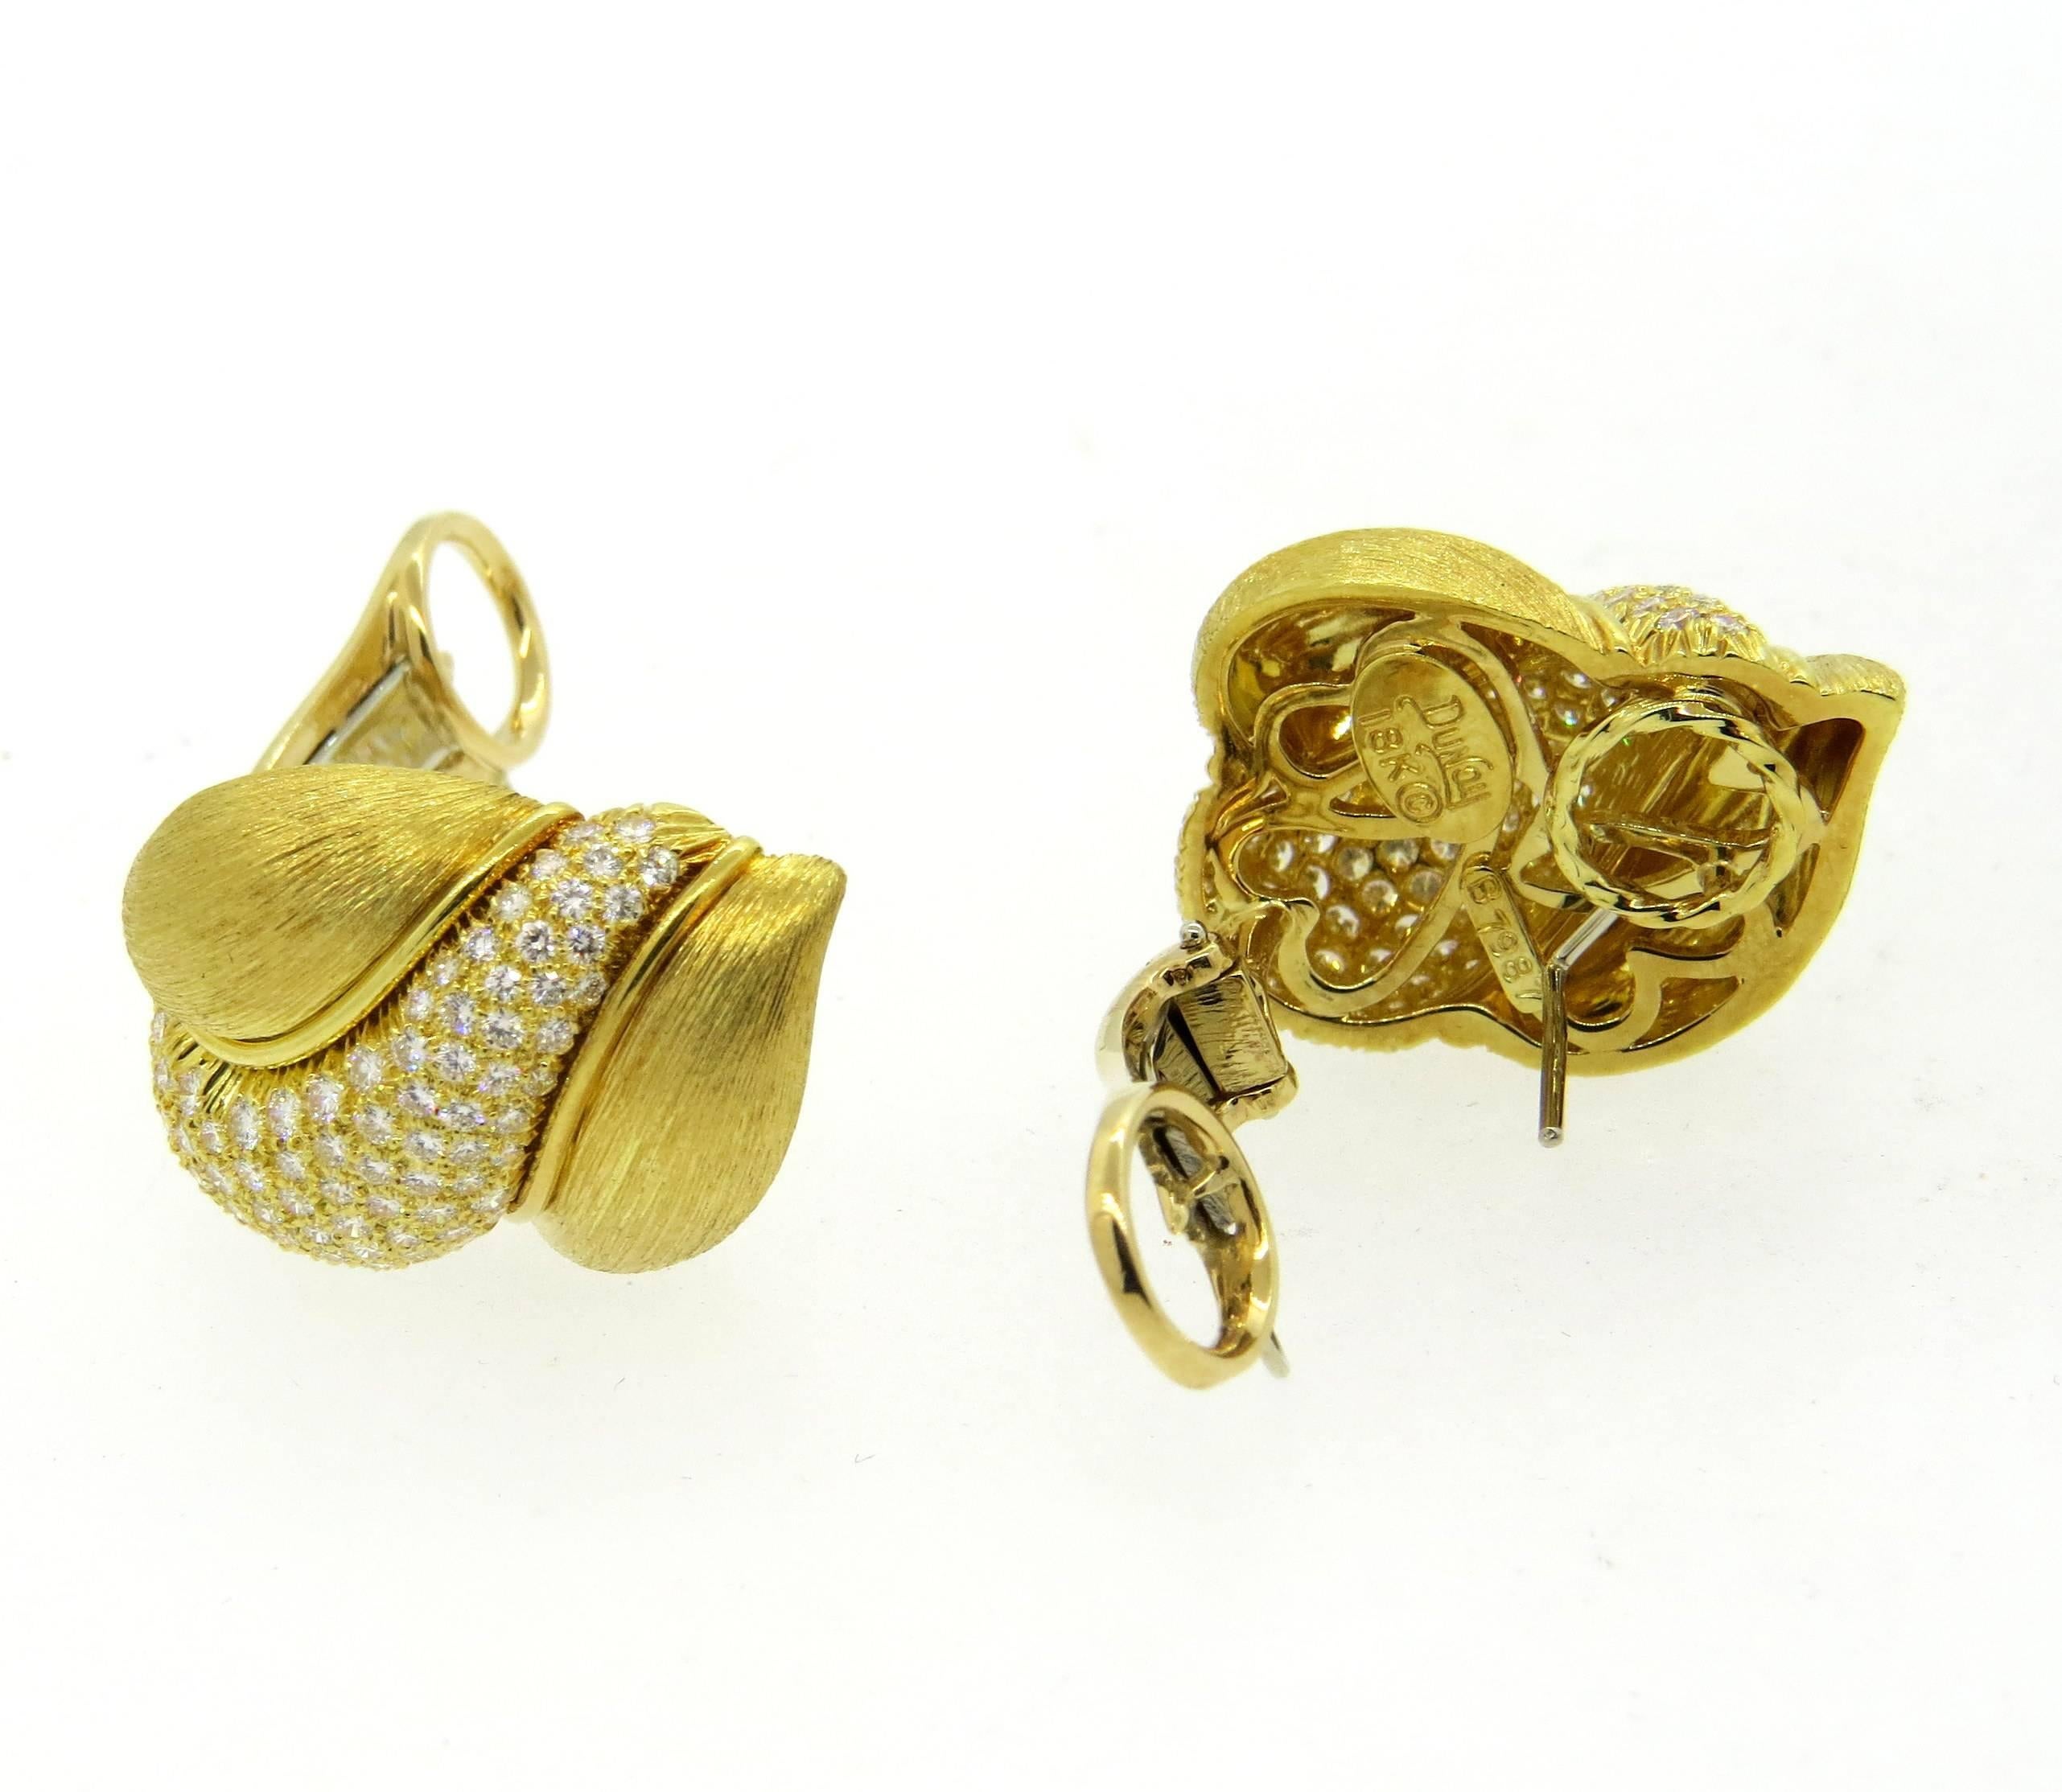 A pair of 18k brushed gold earrings, crafted by Henry Dunay, decorated with approximately 1.60ctw in G/VS diamonds. Earrings are 22mm x 21mm. Marked: Dunay, 7987, 750. Weight  23.8 grams